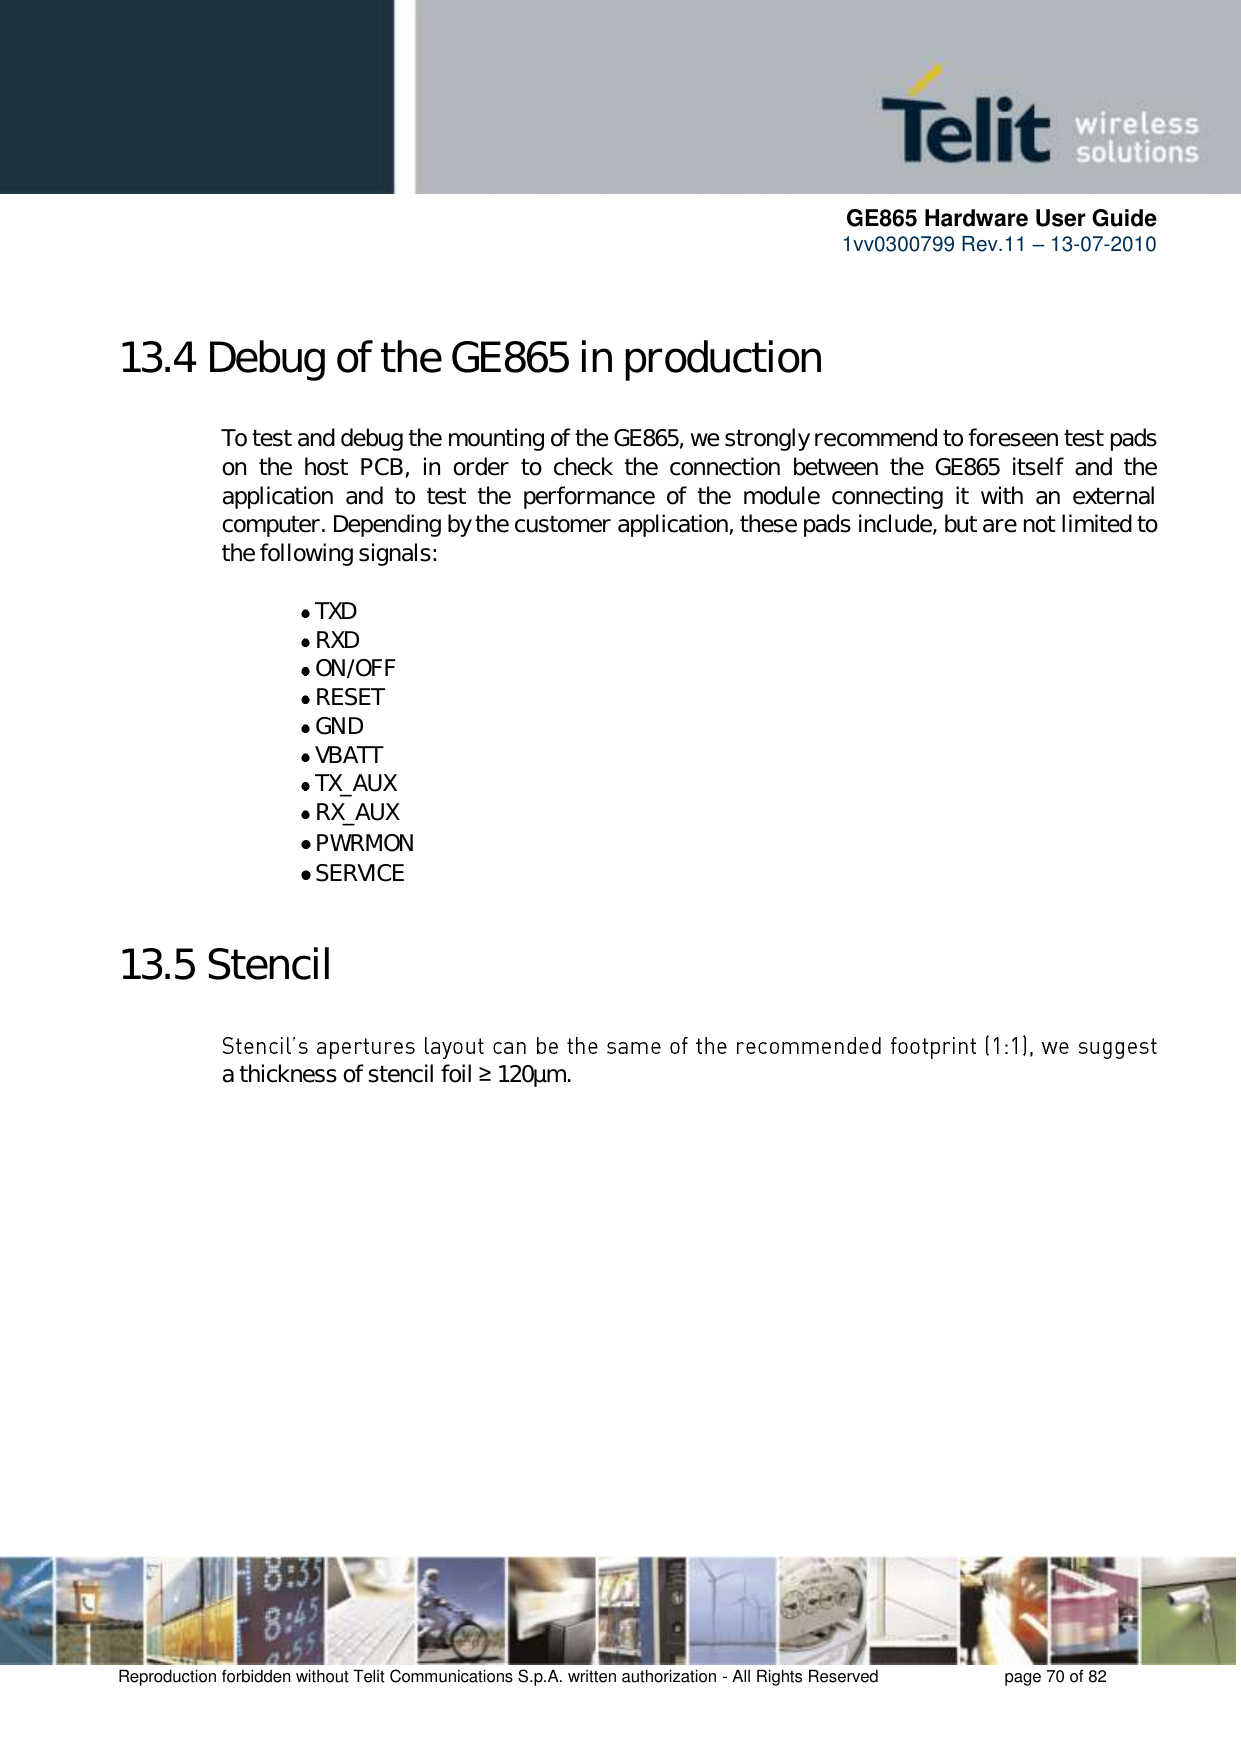      GE865 Hardware User Guide 1vv0300799 Rev.11 – 13-07-2010       Reproduction forbidden without Telit Communications S.p.A. written authorization - All Rights Reserved    page 70 of 82  13.4 Debug of the GE865 in production  To test and debug the mounting of the GE865, we strongly recommend to foreseen test pads on  the  host  PCB,  in  order  to  check  the  connection  between  the  GE865  itself  and  the application  and  to  test  the  performance  of  the  module  connecting  it  with  an  external computer. Depending by the customer application, these pads include, but are not limited to the following signals:   TXD  RXD  ON/OFF  RESET  GND  VBATT  TX_AUX  RX_AUX  PWRMON   SERVICE 13.5 Stencil  a thickness of stencil foil ≥ 120µm. 